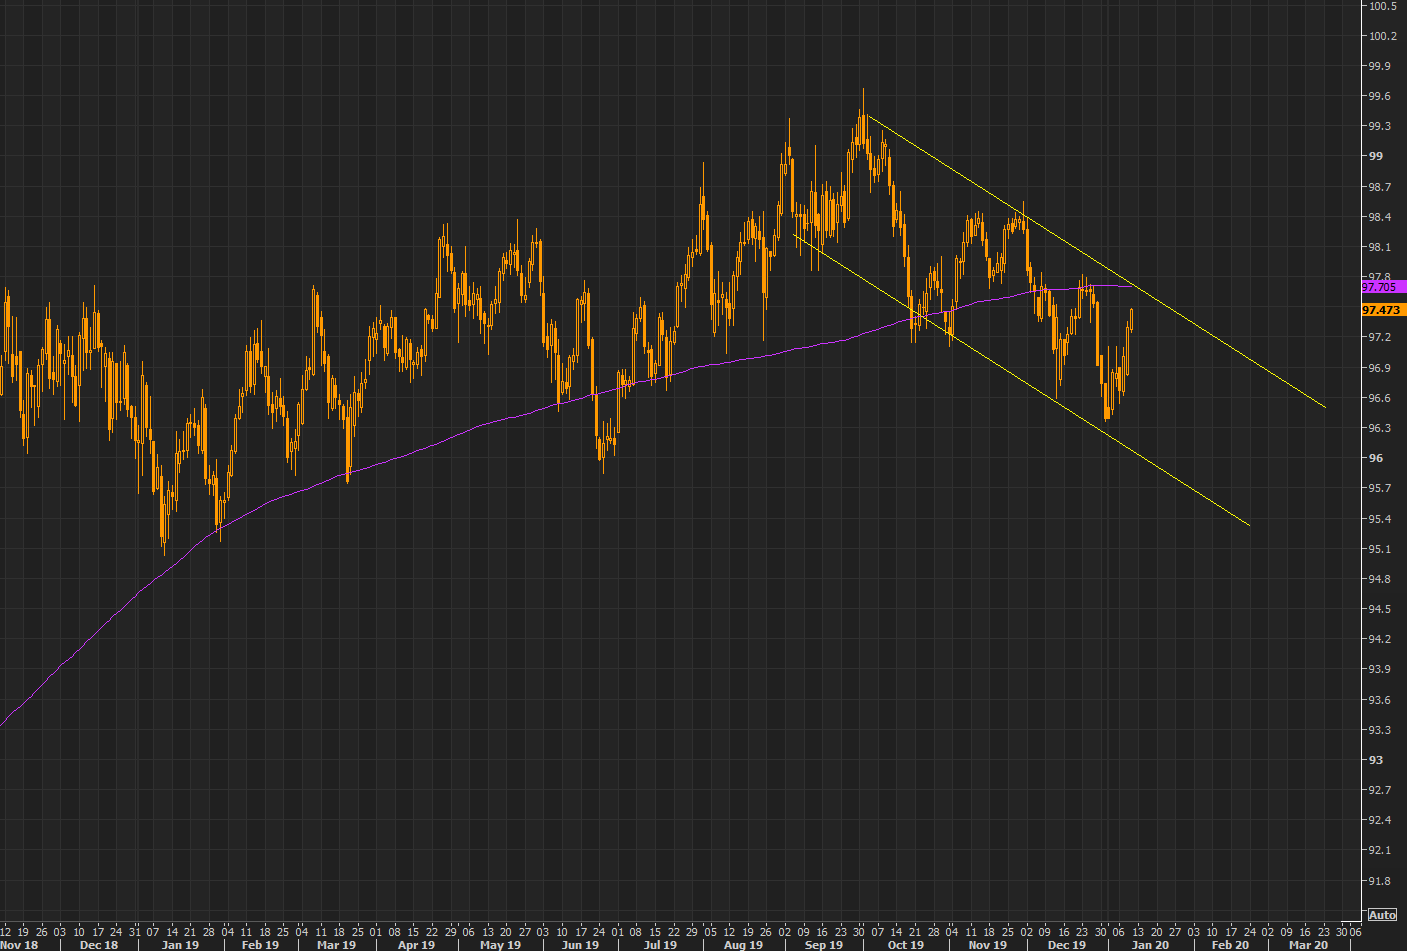 DXY - quickly approaching the upper part of the trend channel and the 200 day average